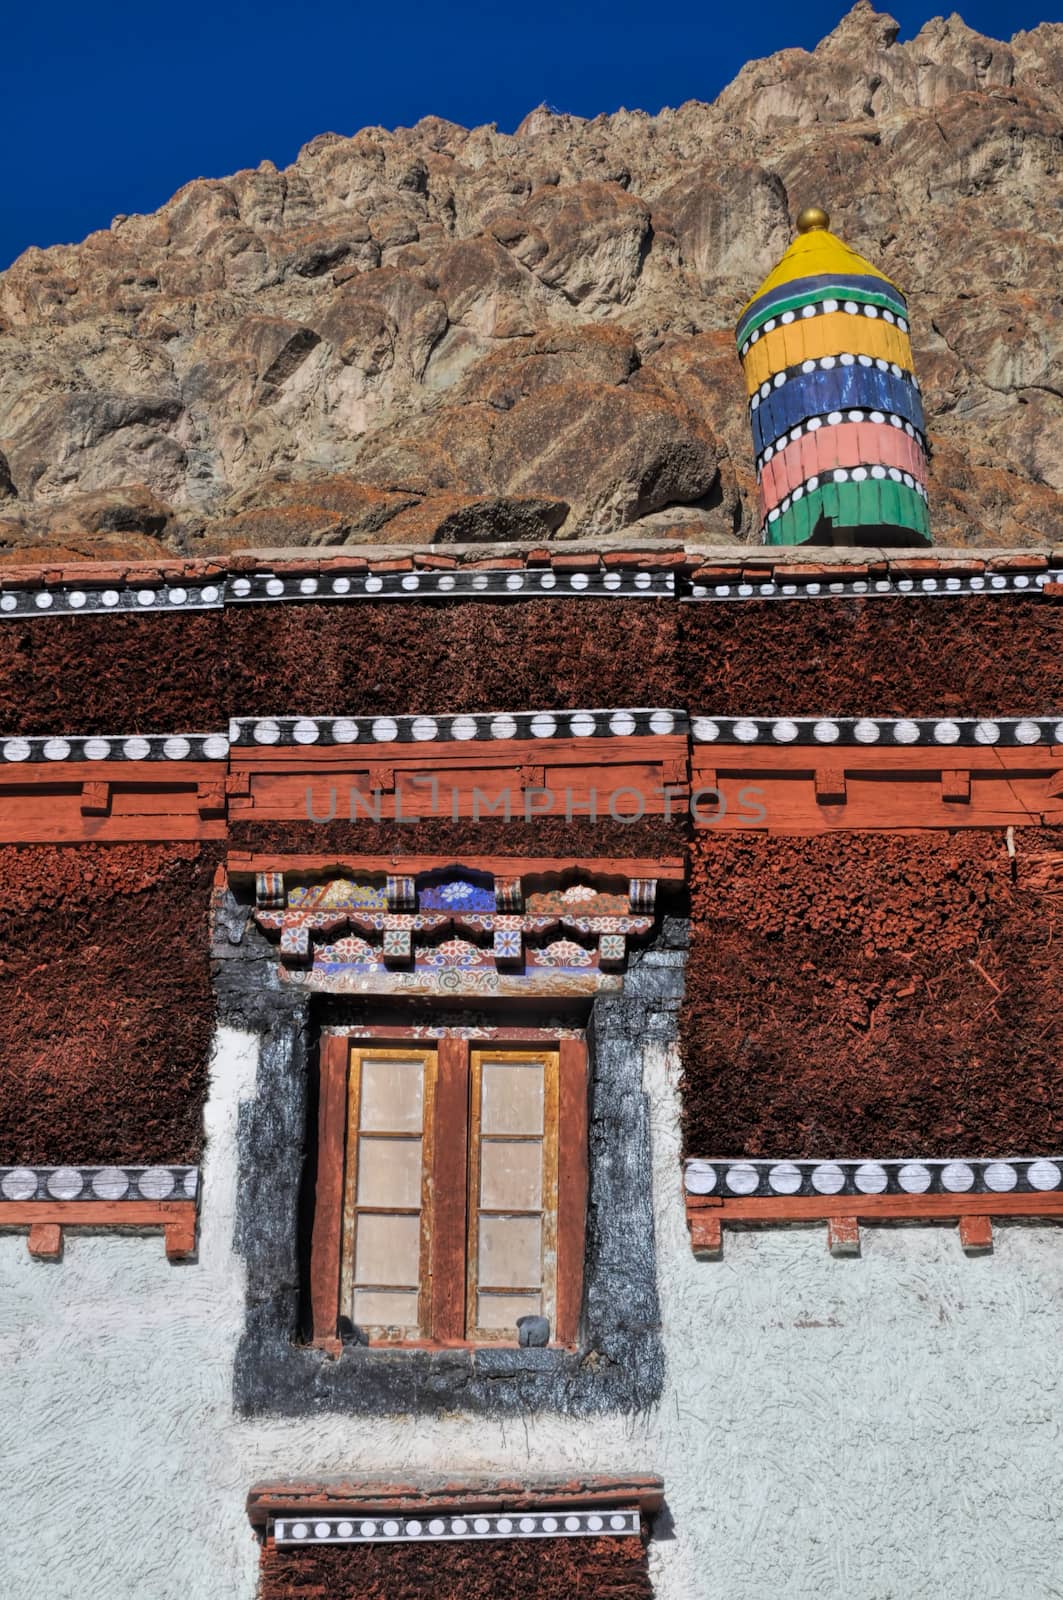 Close-up view of Hemis monastery built into a mountain